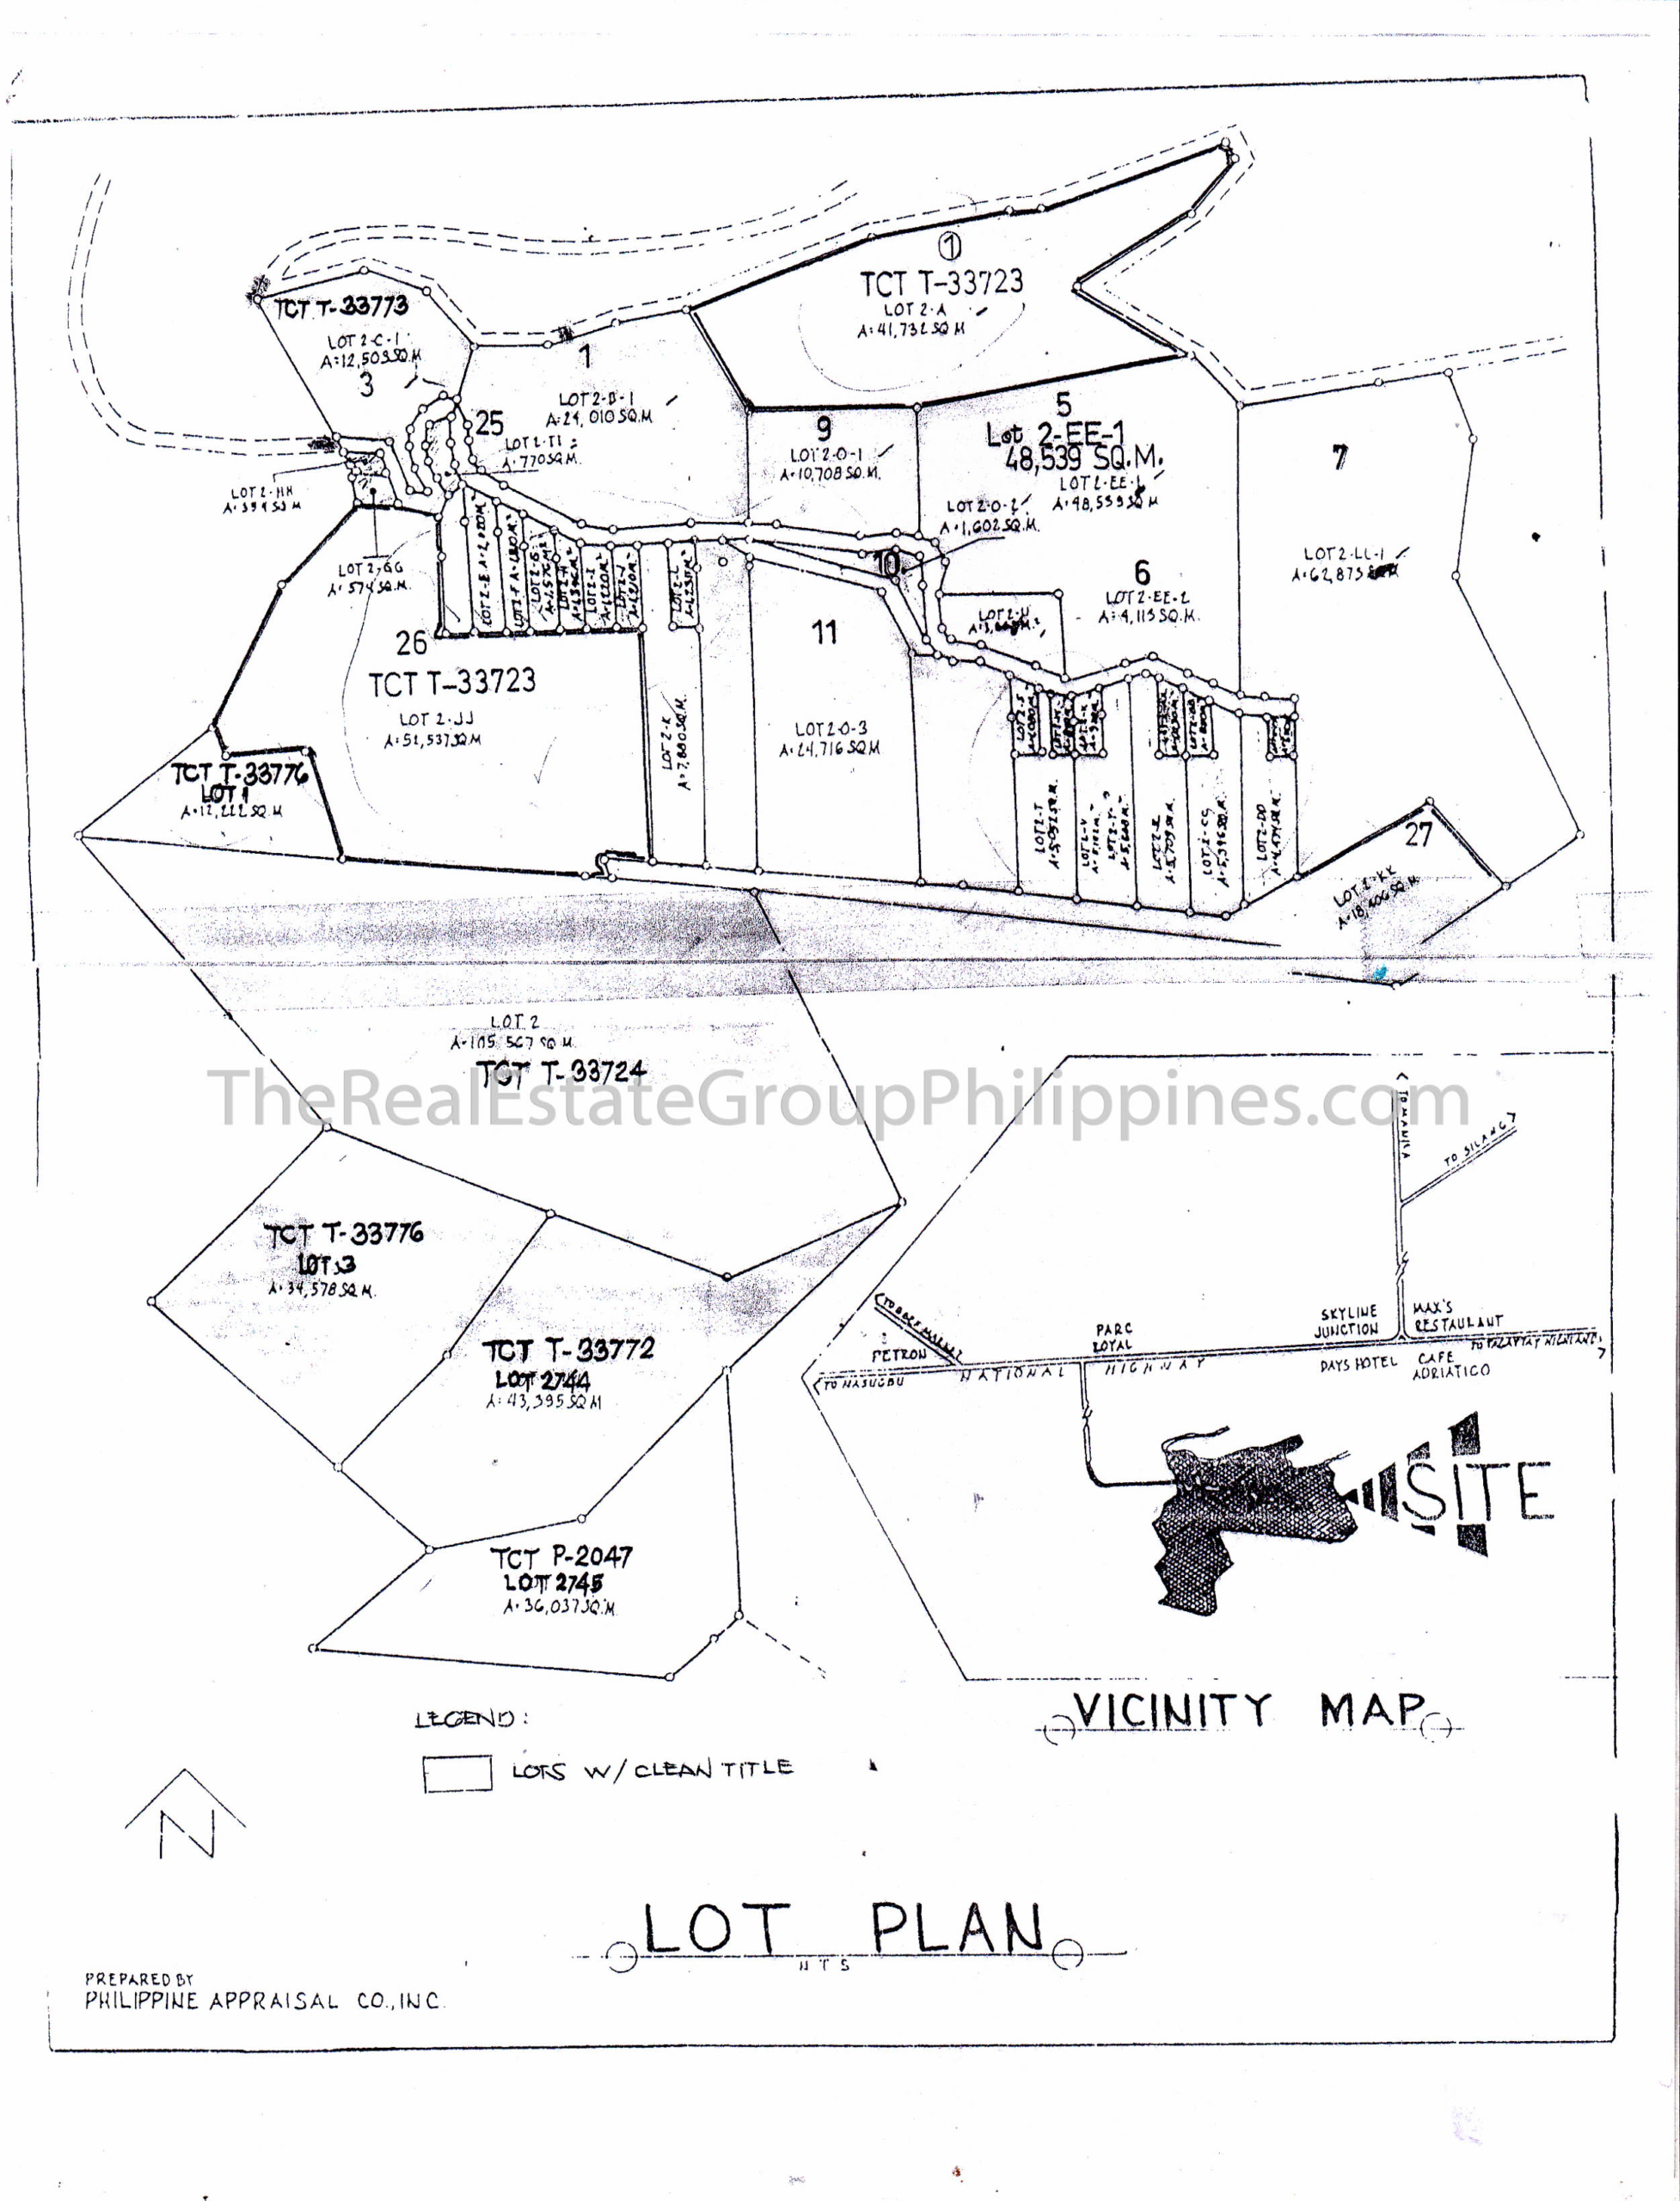 60 Hectares Vacant Lot Land For Sale Tagaytay (1 of 3)